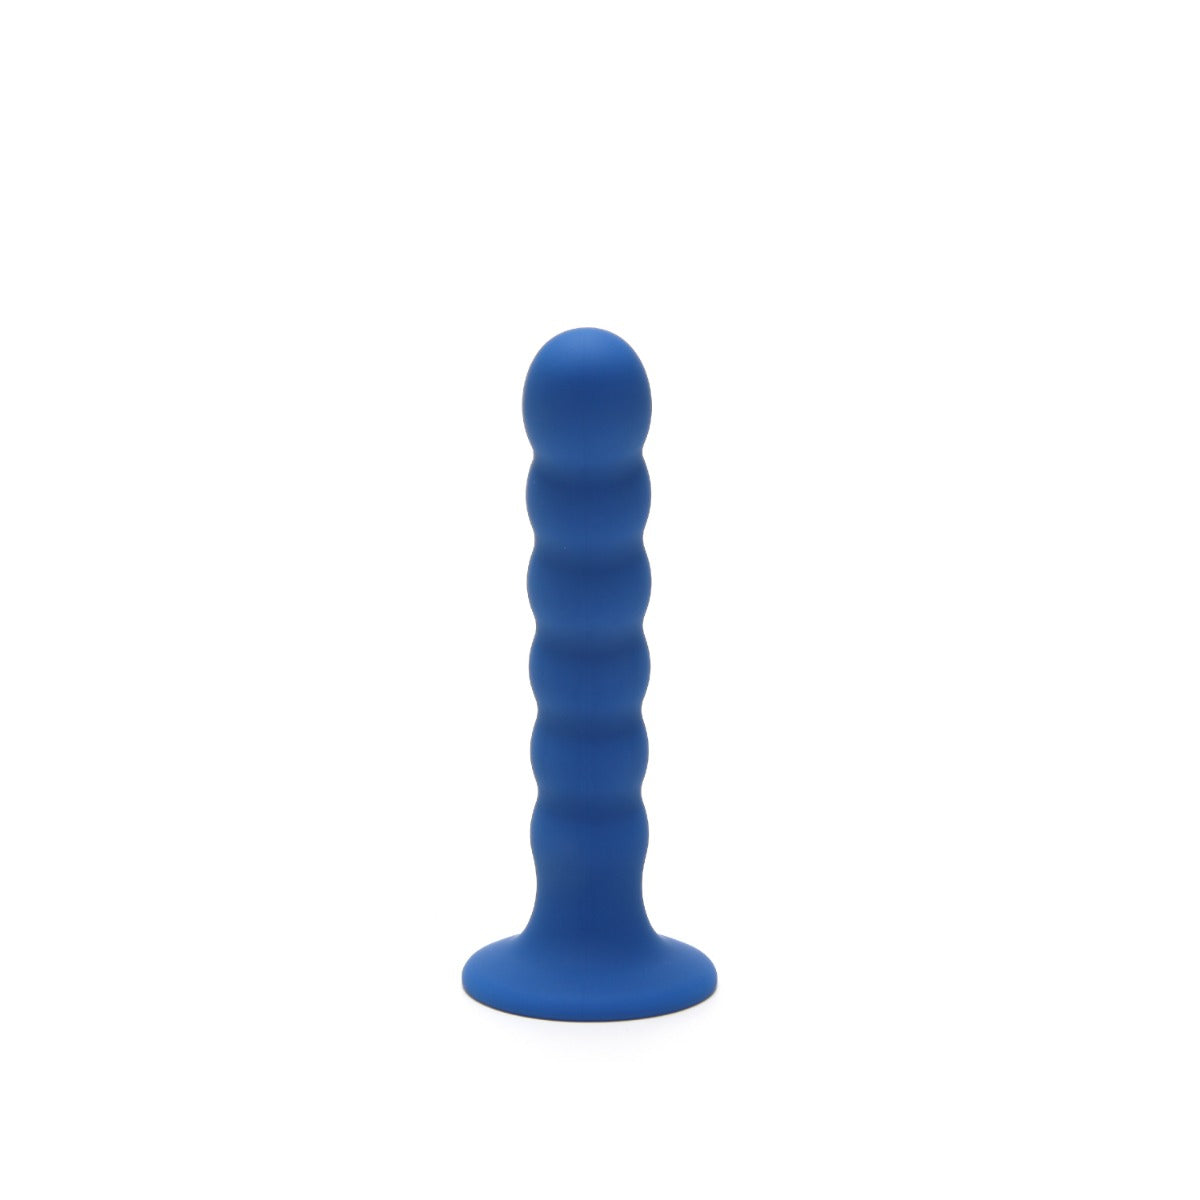 a blue plastic dildo on a white background